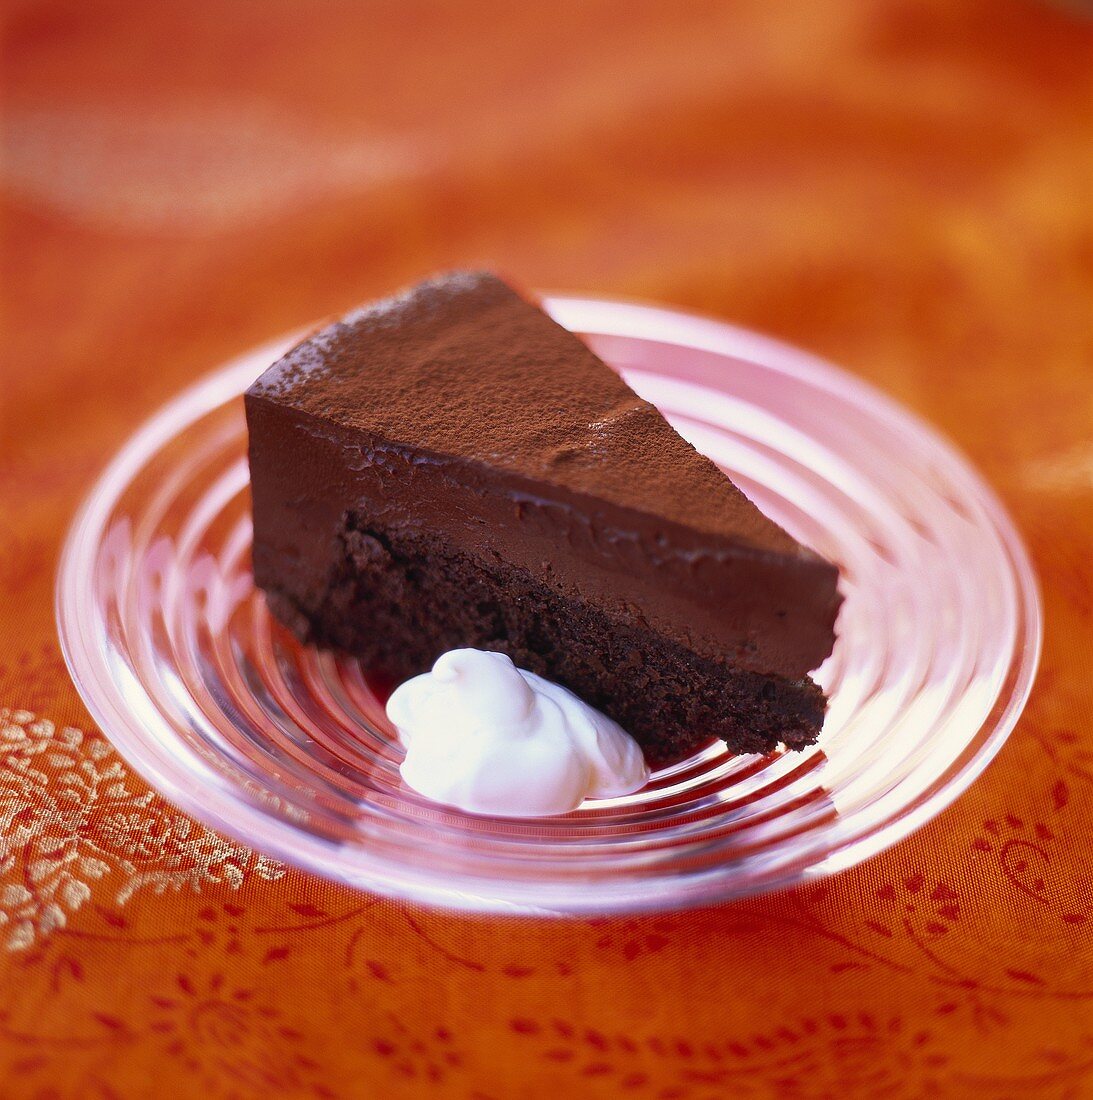 A piece of chocolate cake with cream